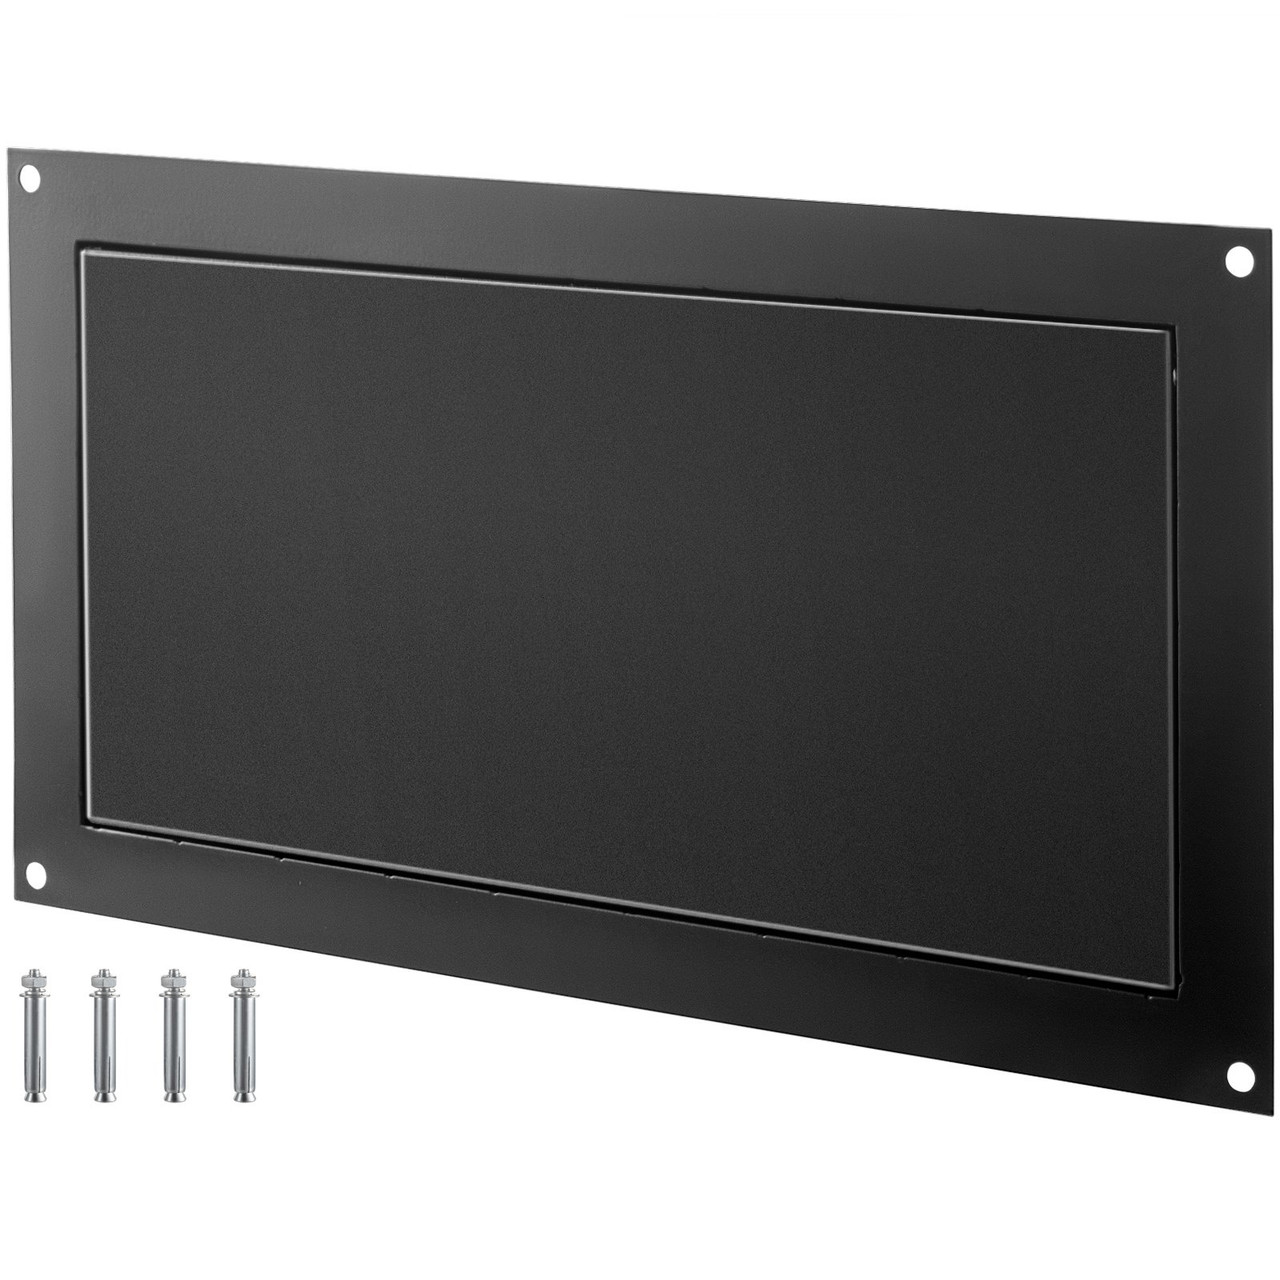 Flood Vent, 8" Height x 16" Width Foundation Flood Vent, to Reduce Foundation Damage and Flood Risk, Black, Wall Mounted Flood Vent, for Crawl Spaces,Garages & Full Height Enclosures